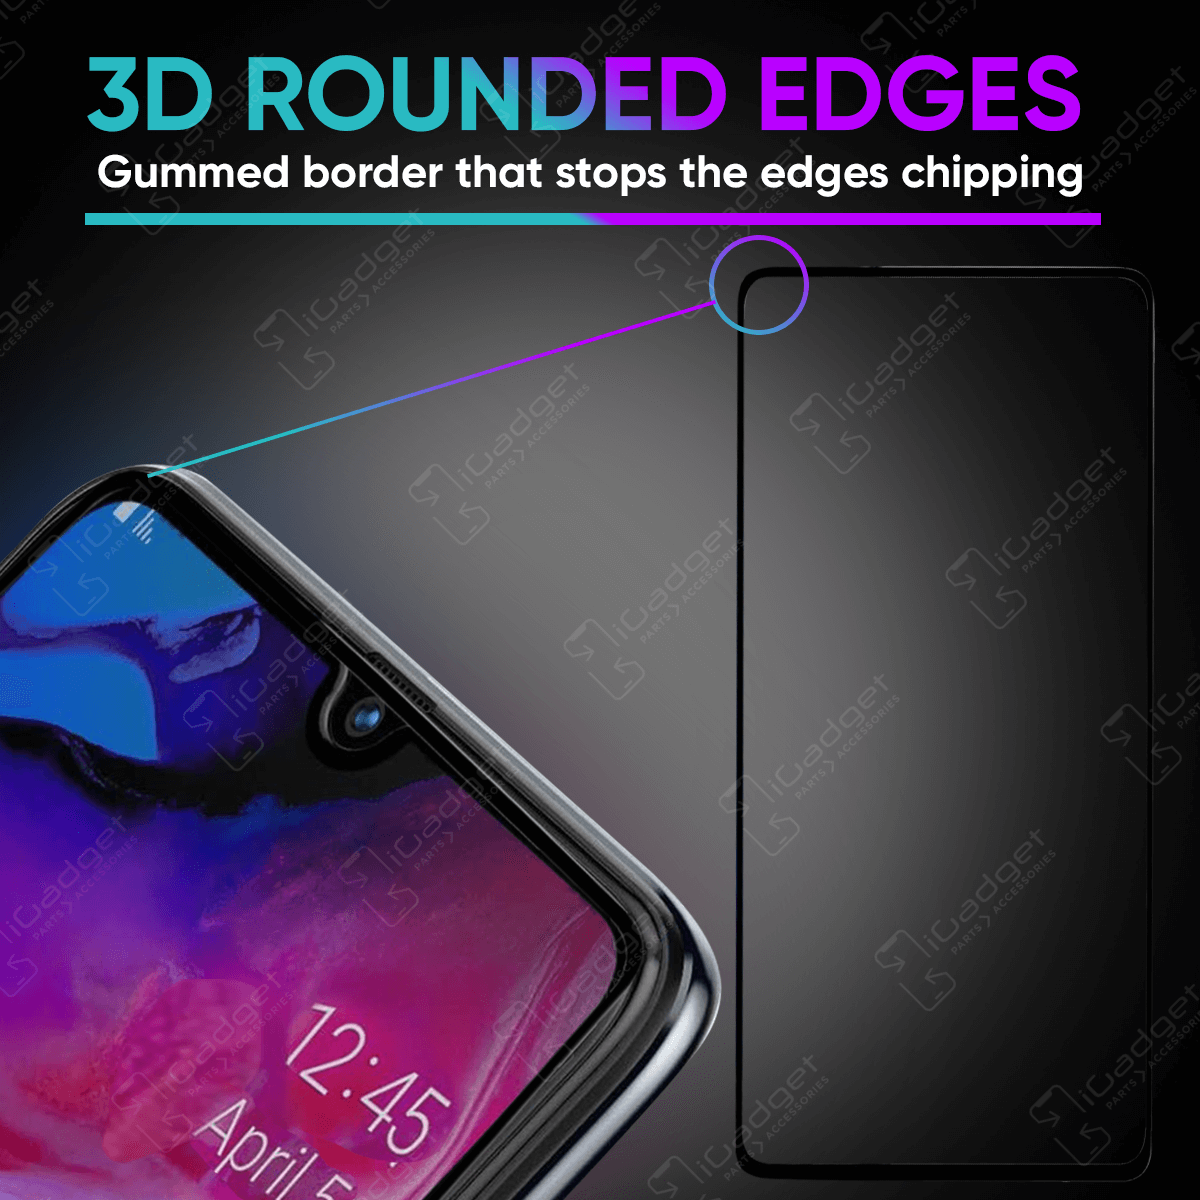 Samsung Galaxy A70/A70s (2019) Screen Protector | 3D Full Coverage Ultra Clear Tempered Glass